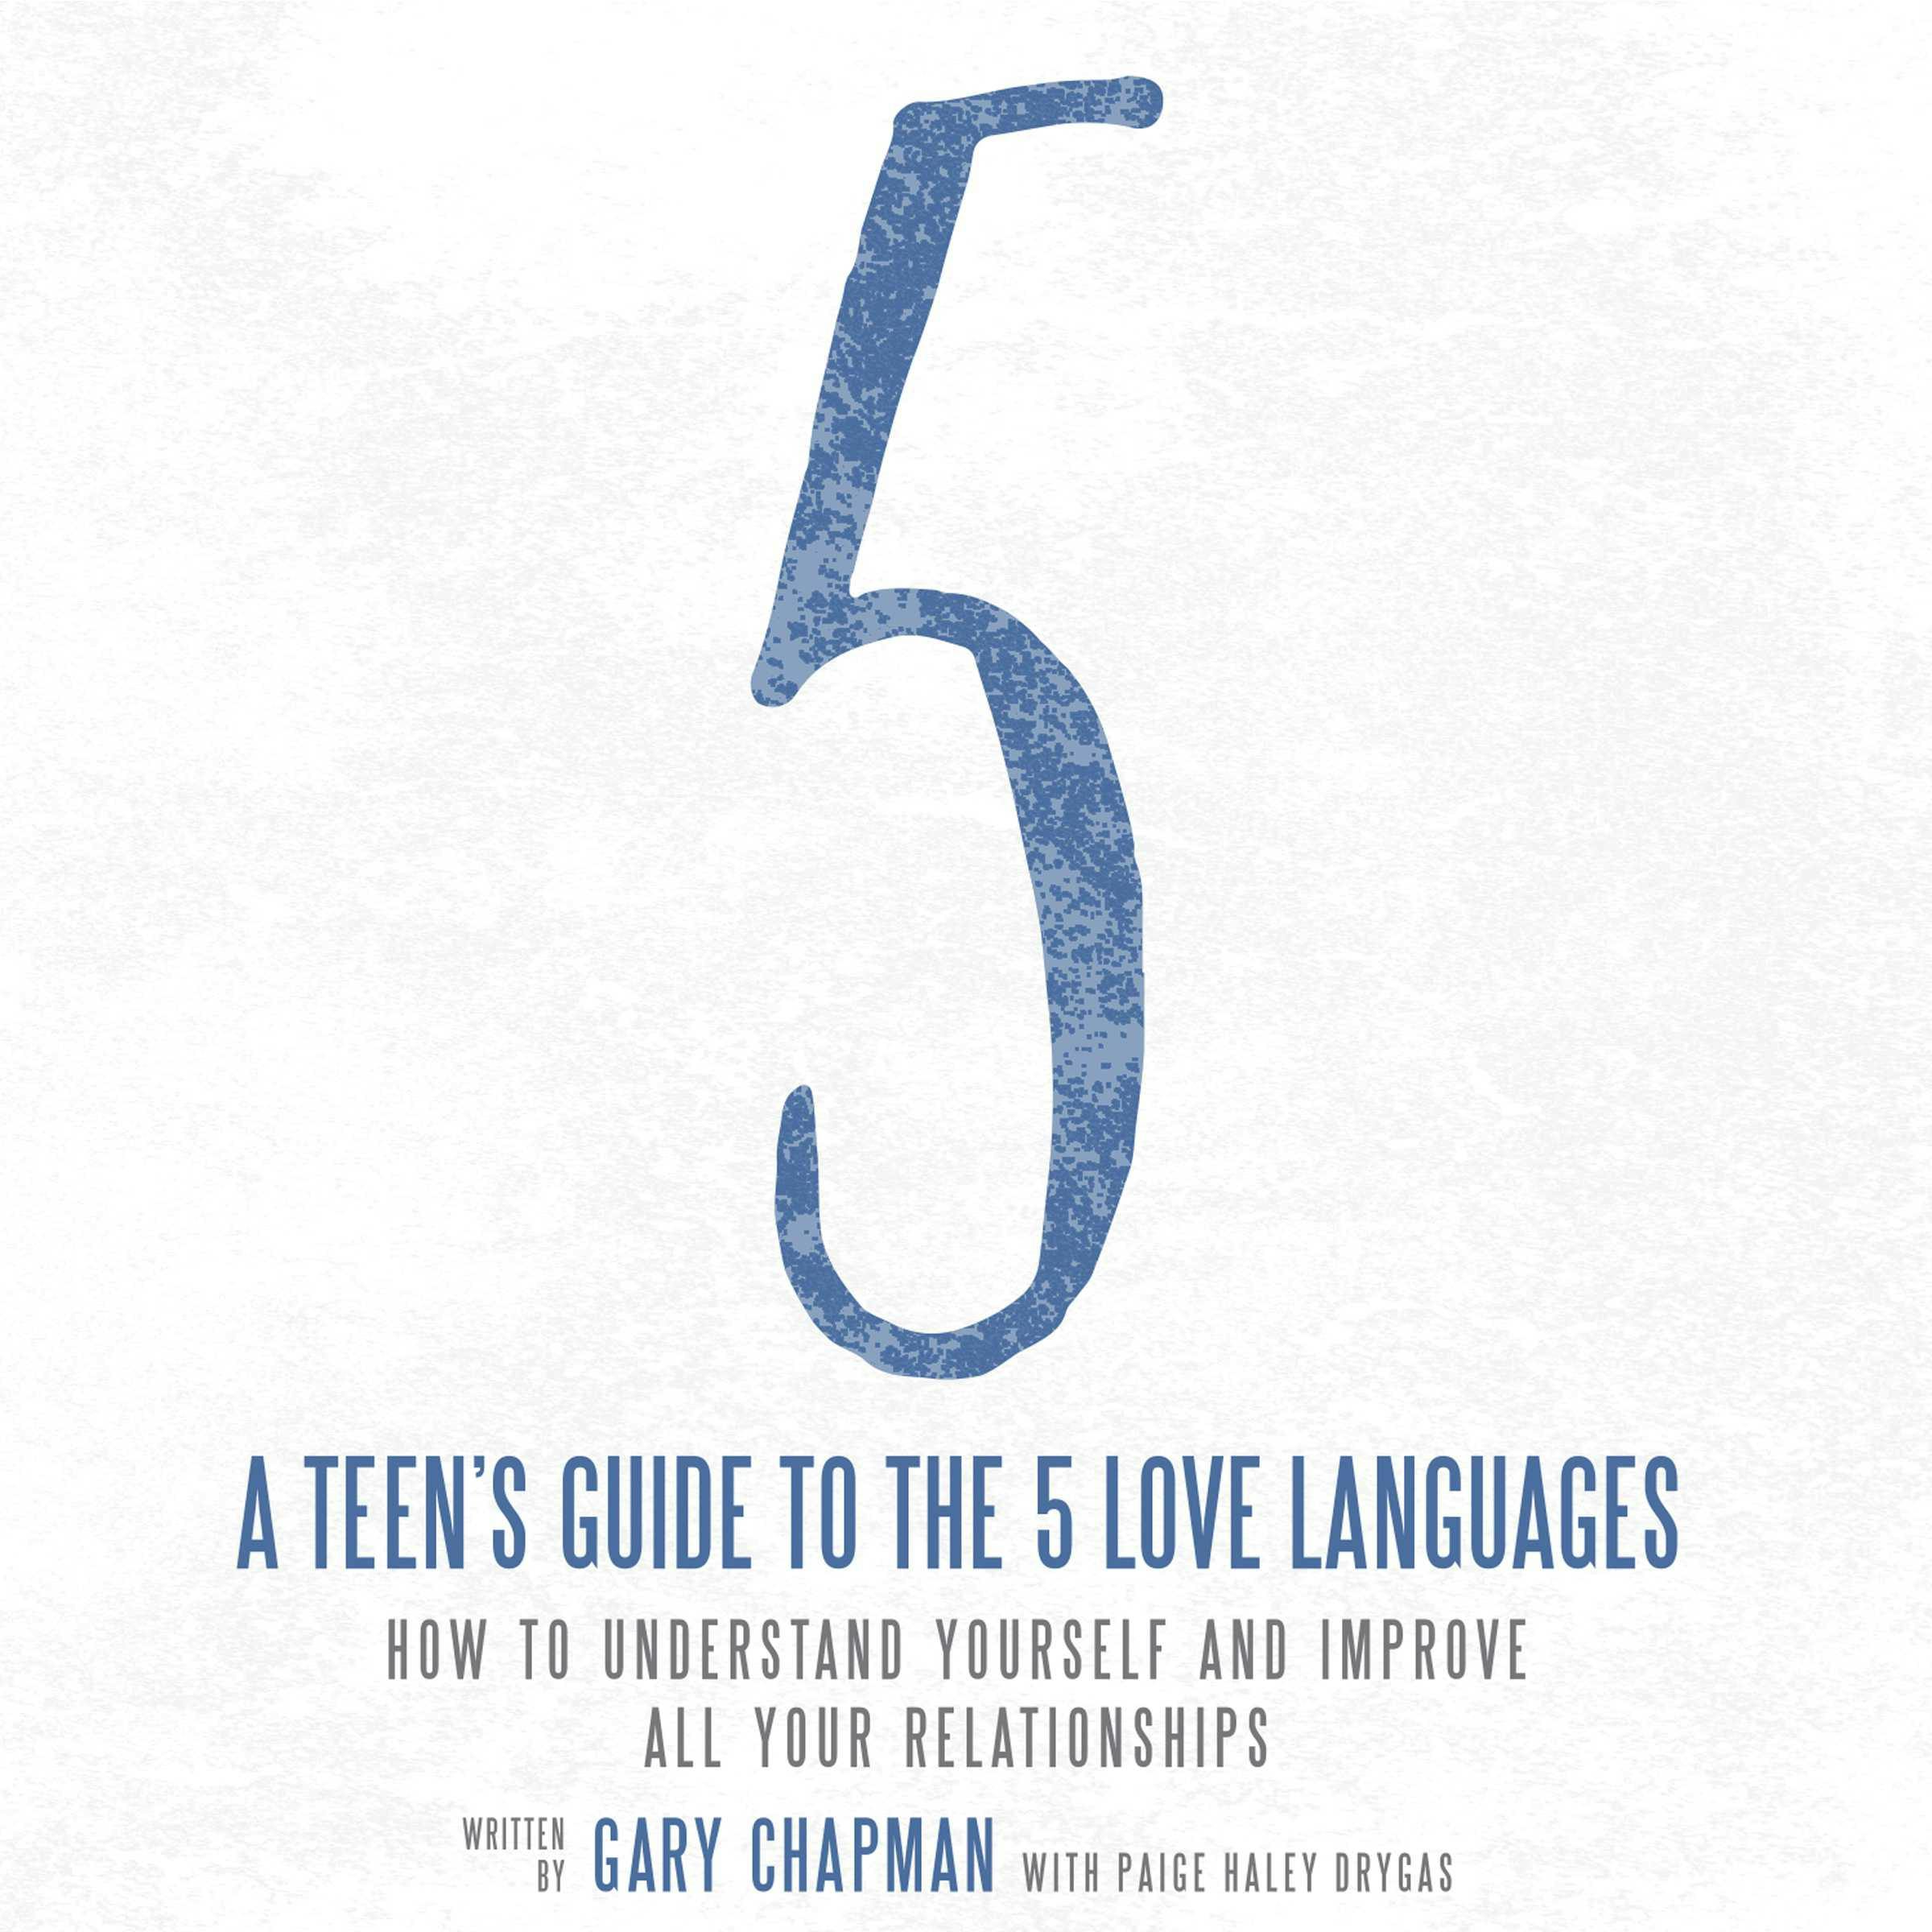 A Teen's Guide to the 5 Love Languages: How to Understand Yourself and Improve All Your Relationships - Gary Chapman